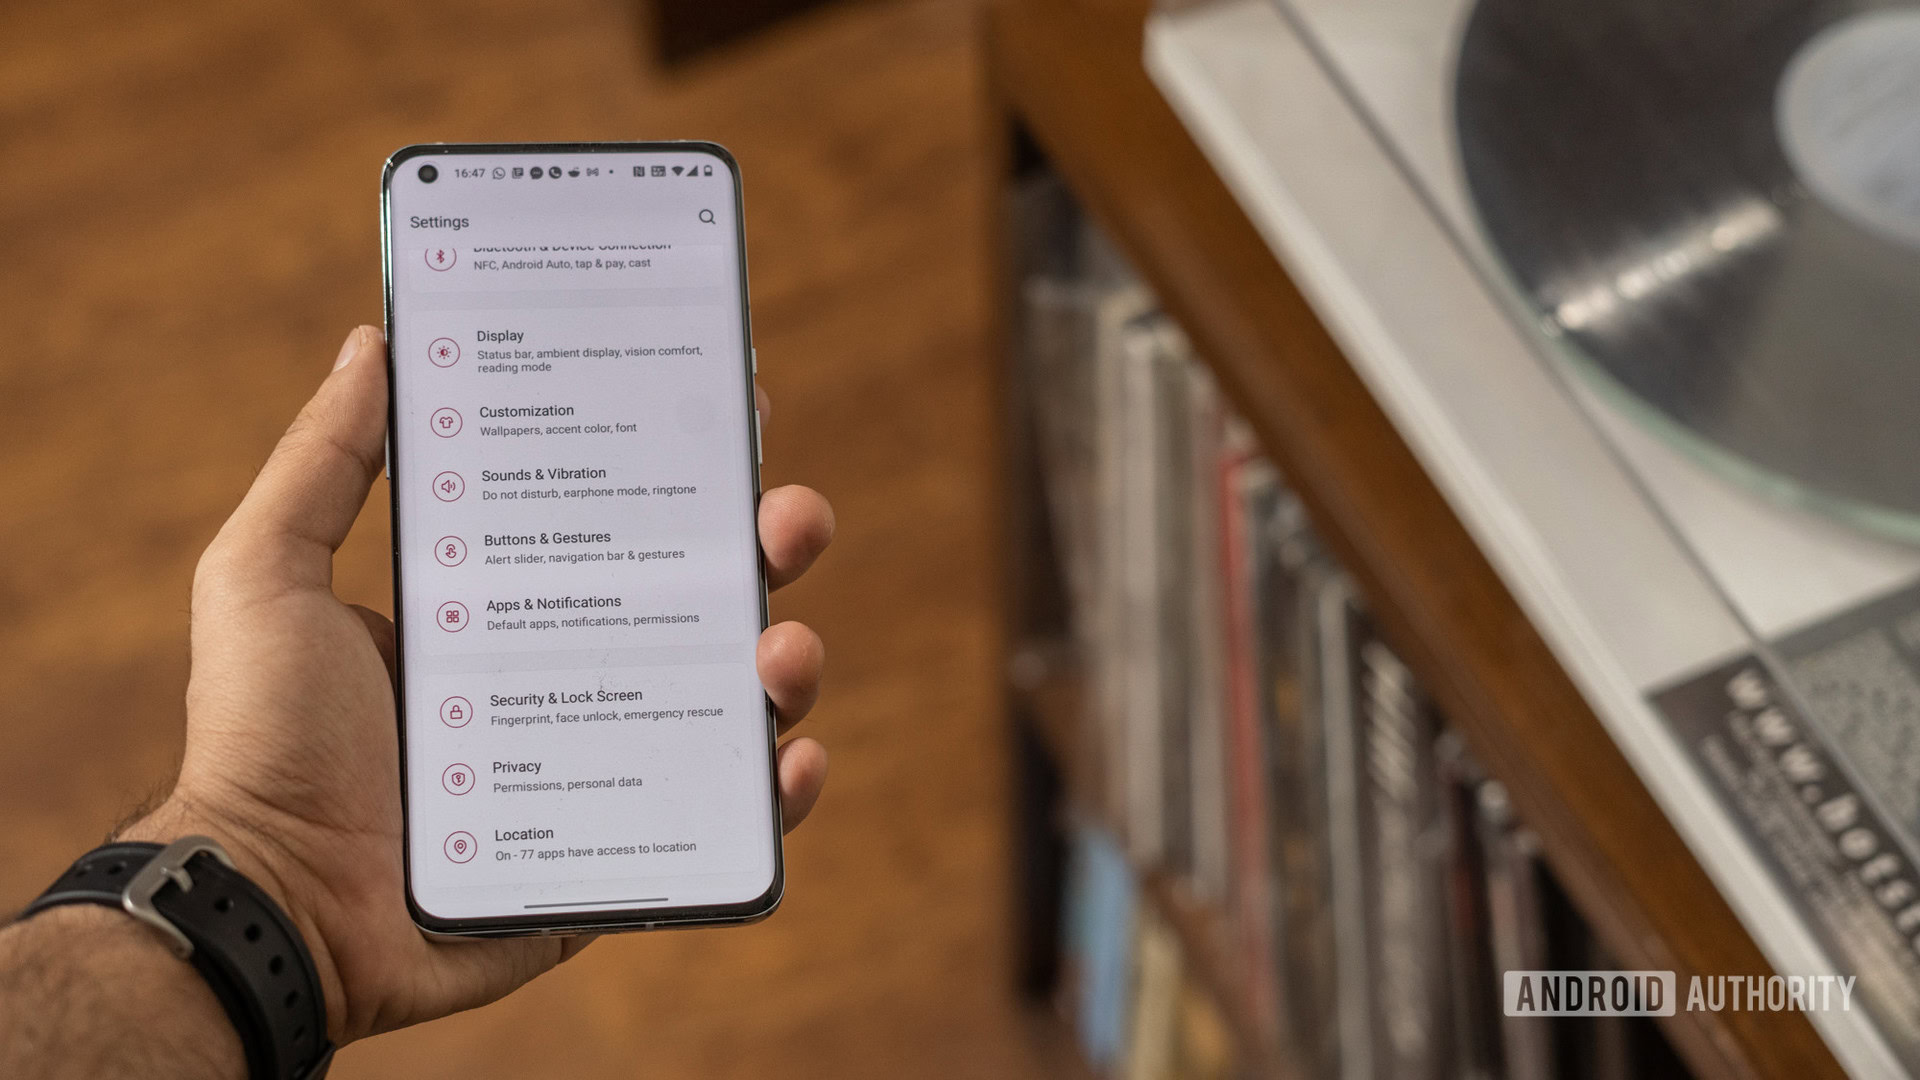 OnePlus 9 Pro in hand with display on